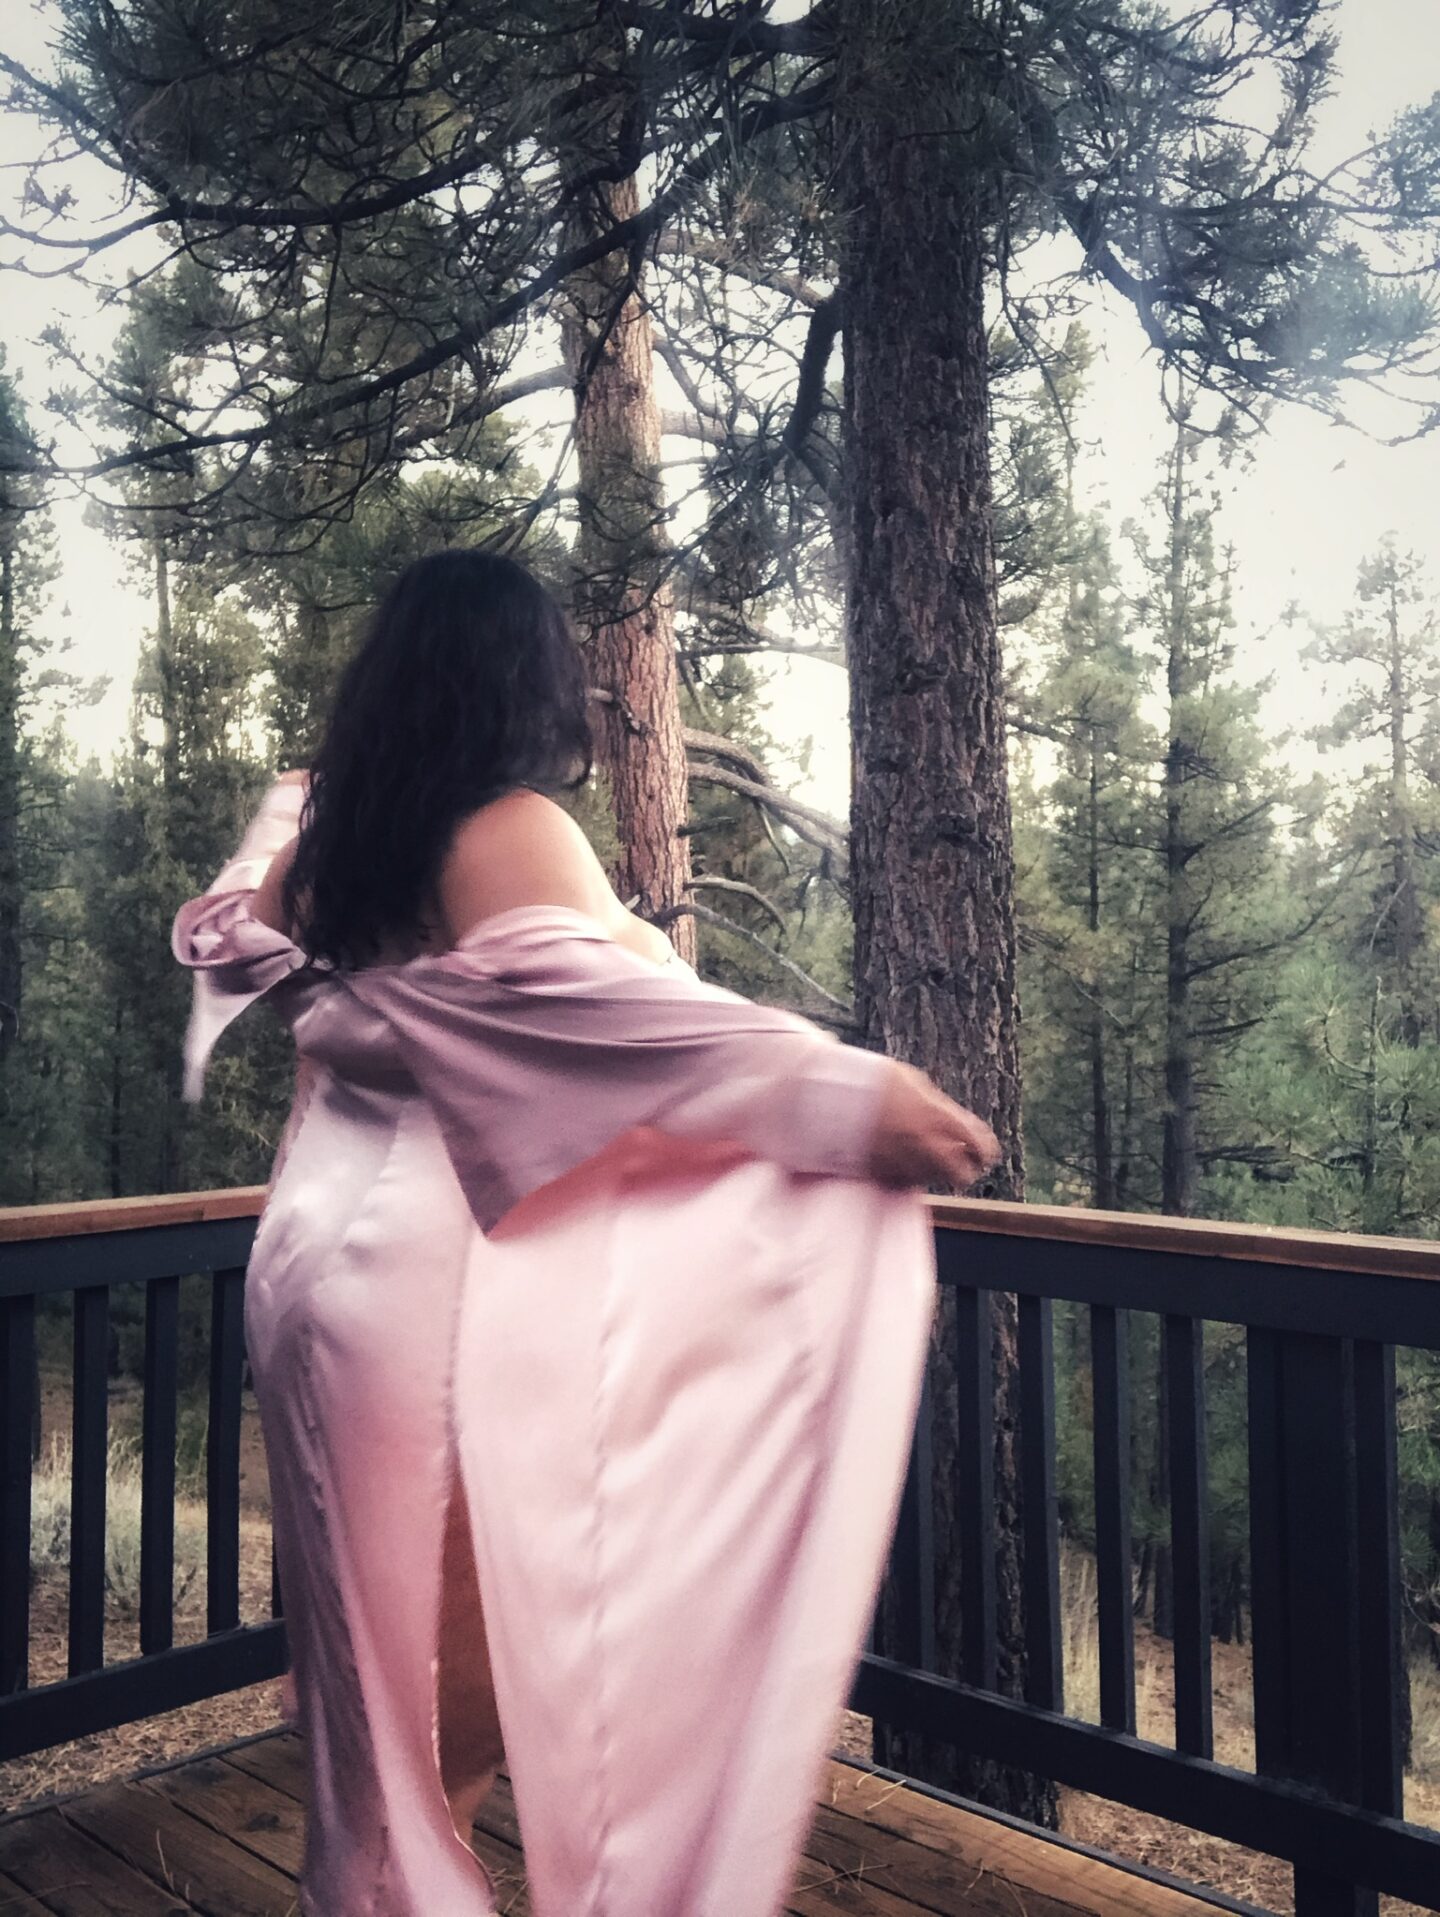 The Chief of Style's Body Positive / Self-Love Photoshoot at Big Bear Retreat Center